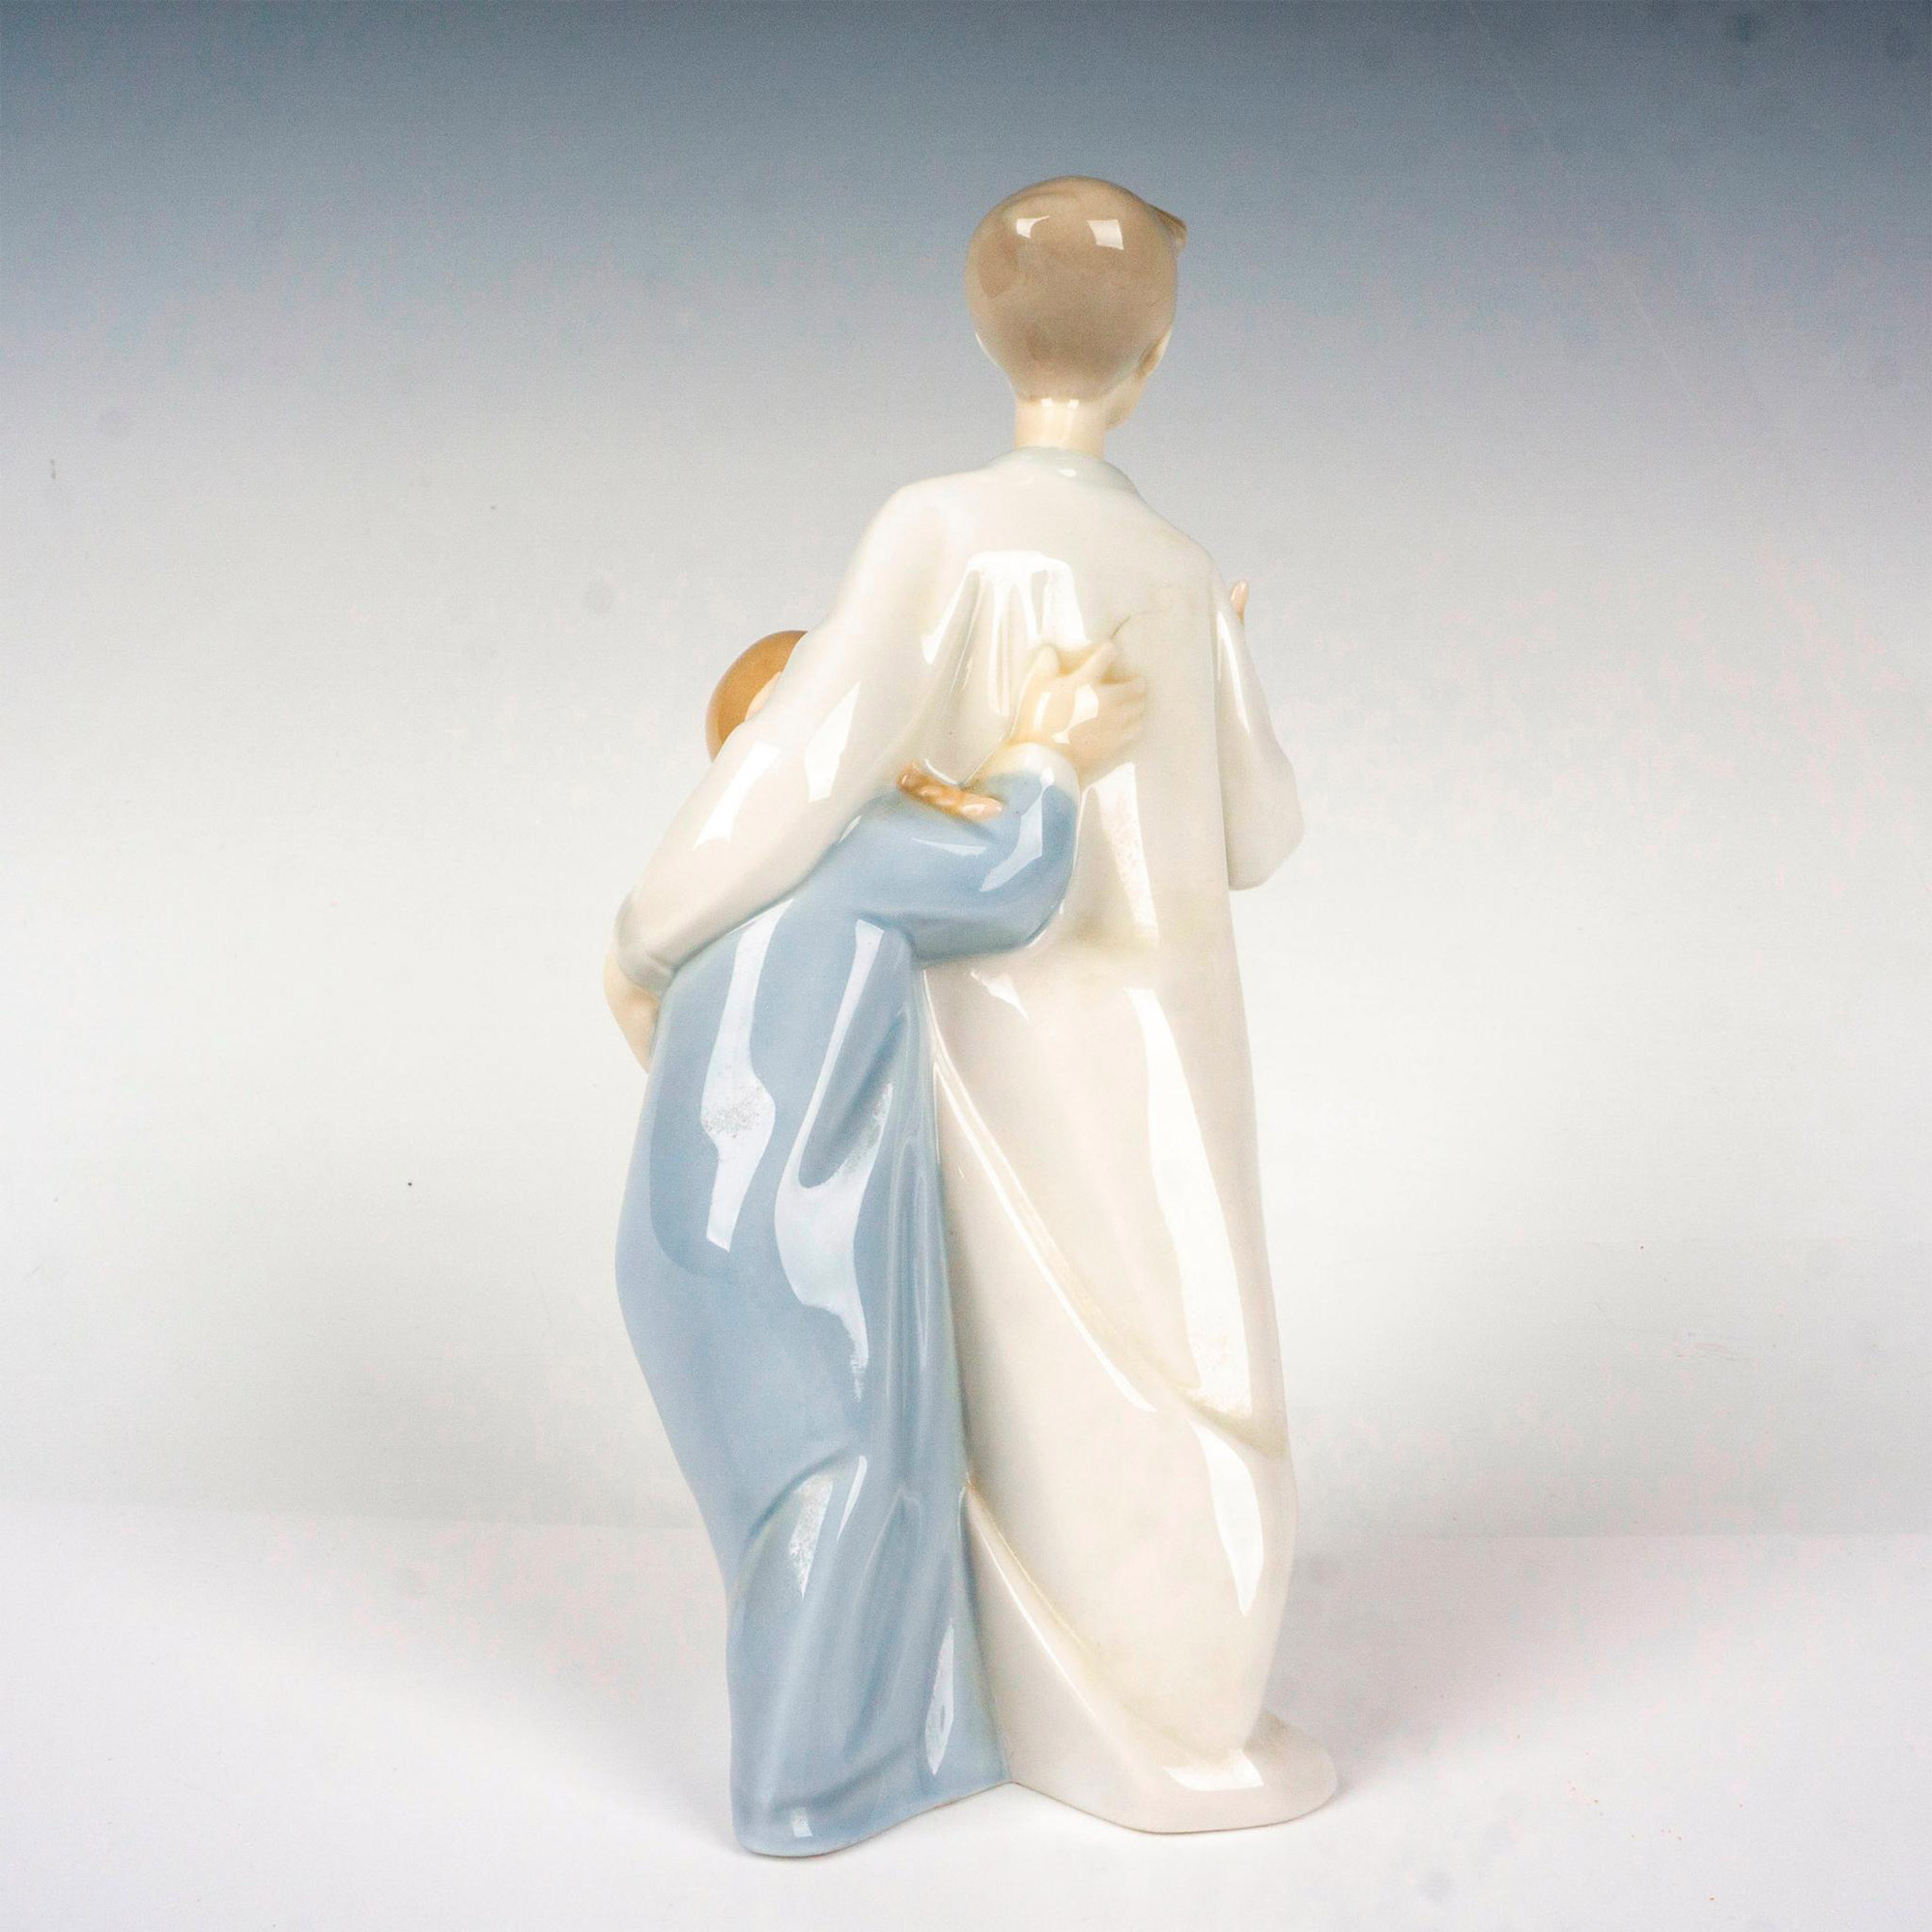 Boy And Girl 1004874 - Lladro Porcelain Figurine - Image 2 of 3